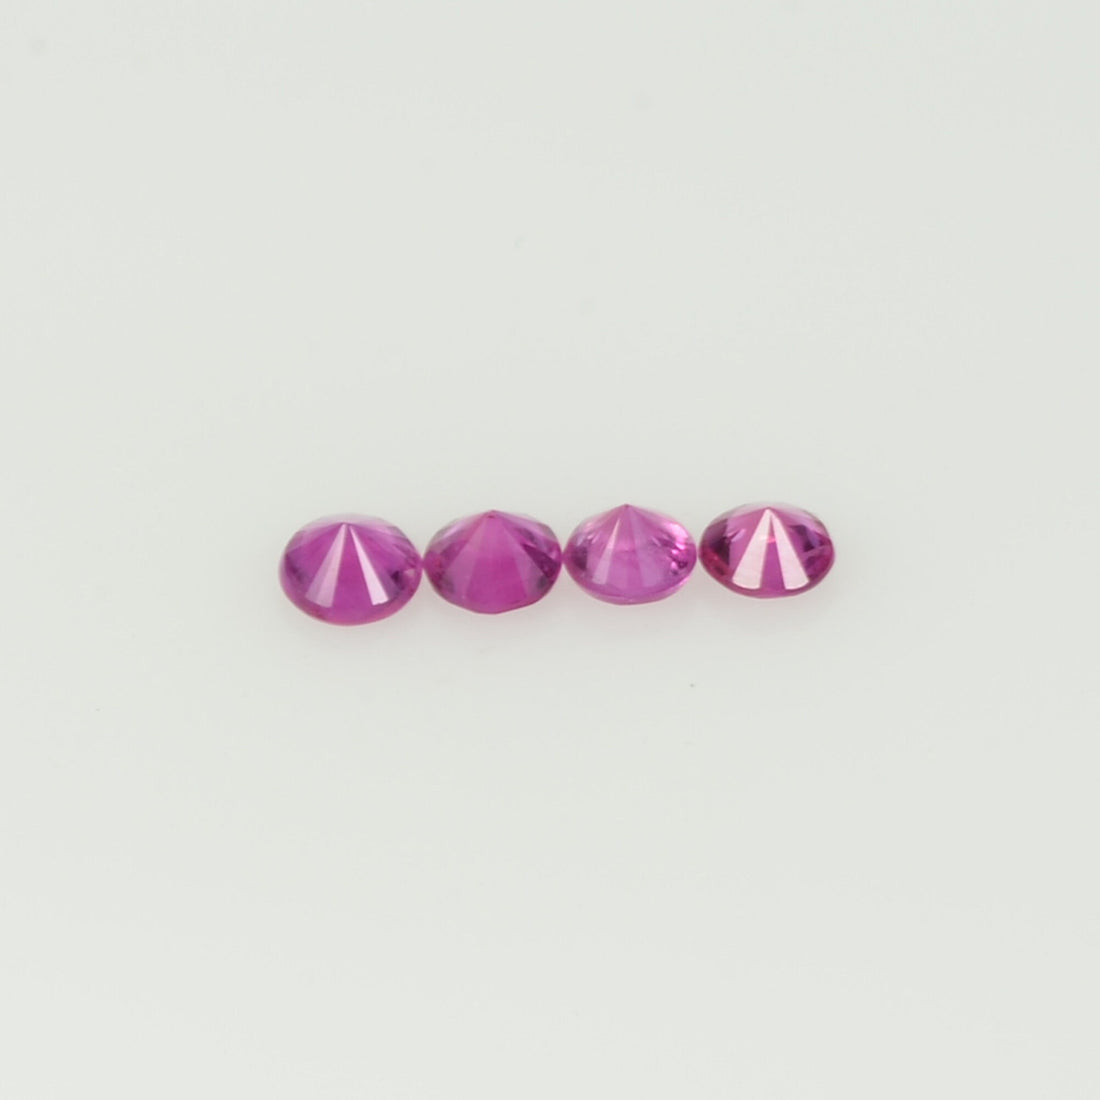 2.5 mm Natural Pink Sapphire Loose Gemstone Round Diamond Cut VS Quality AAA Color